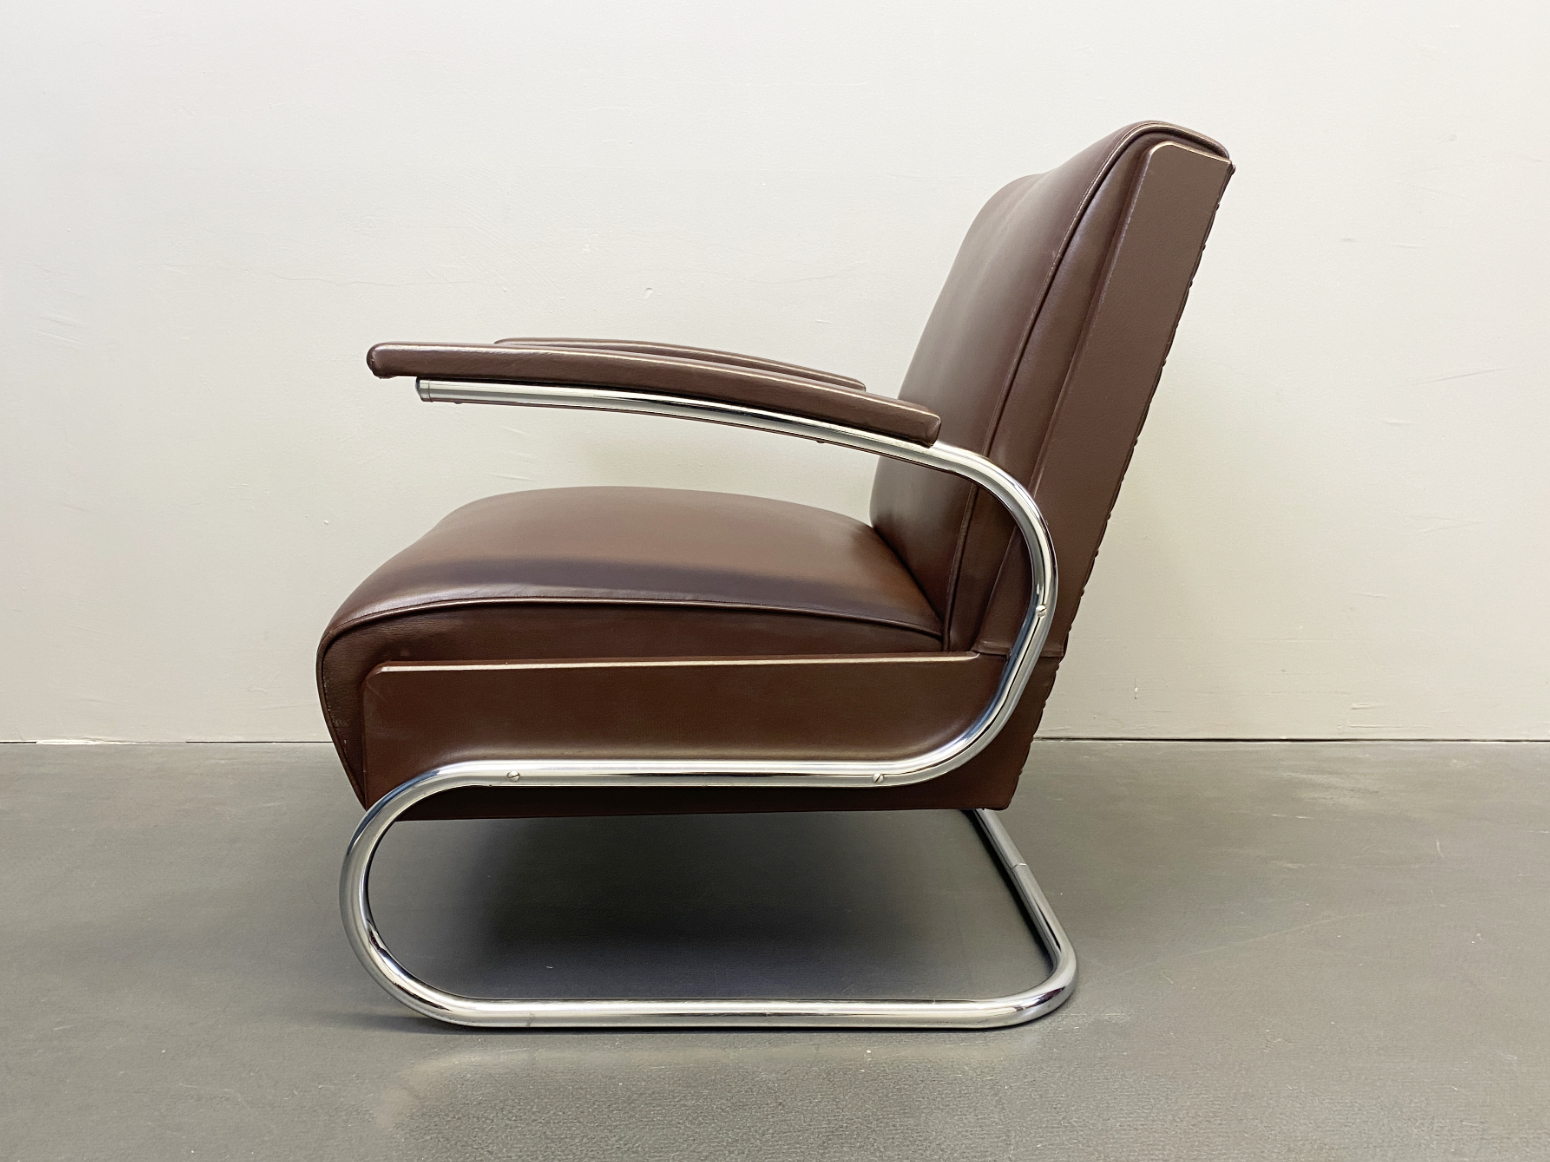 “SOLD” Armchair / Easychair / Cantilever tubular steel brown leather from Mücke Melder, 1930s.